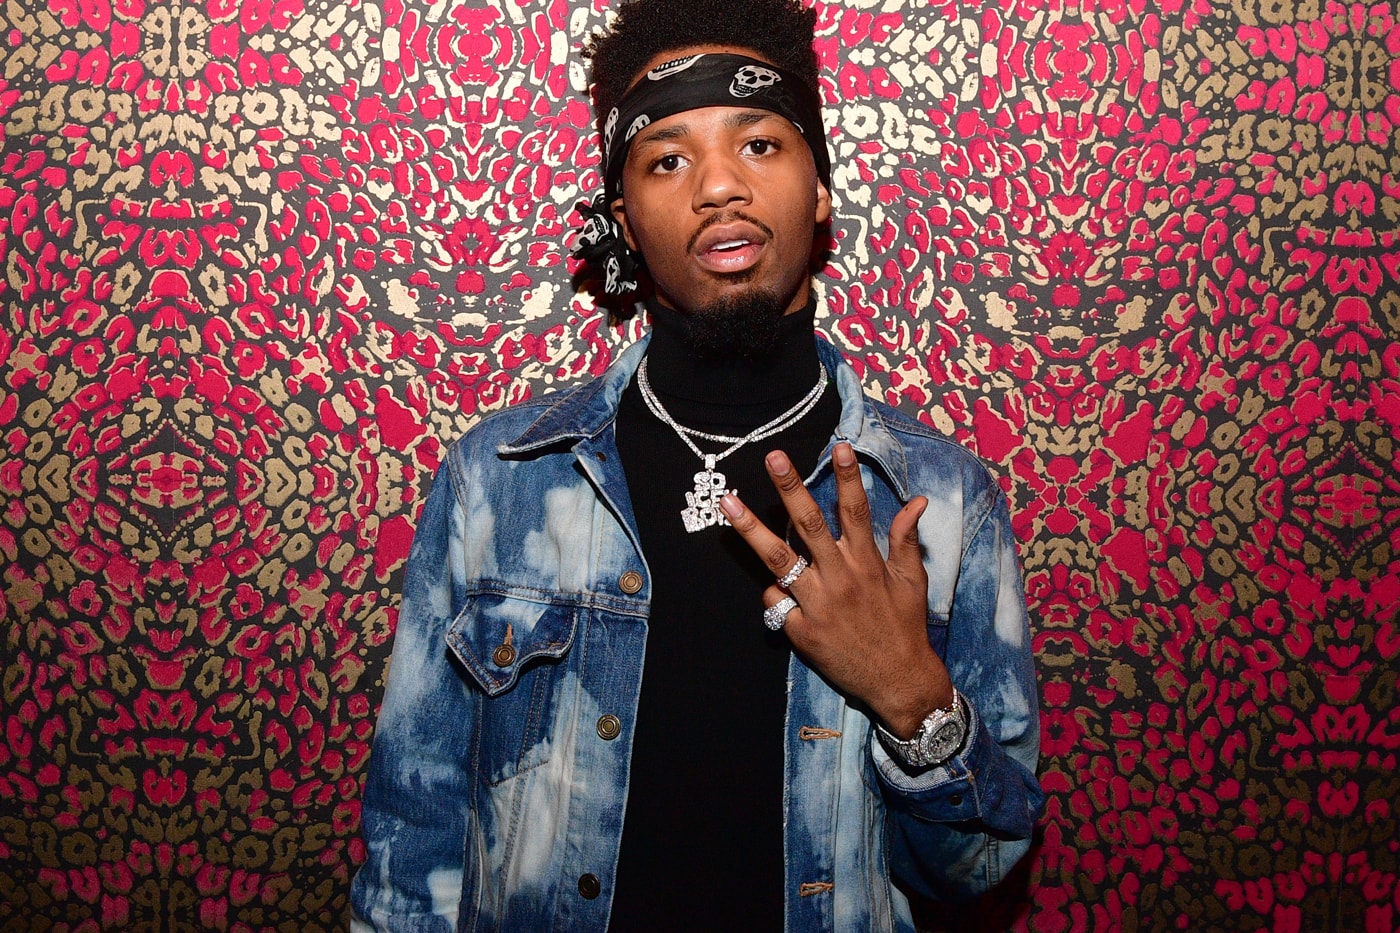 Metro Boomin Russ Beef Whack Diss Track Album Leak Single Music Video EP Mixtape Download Stream Discography 2018 Live Show Performance Tour Dates Album Review Tracklist Remix